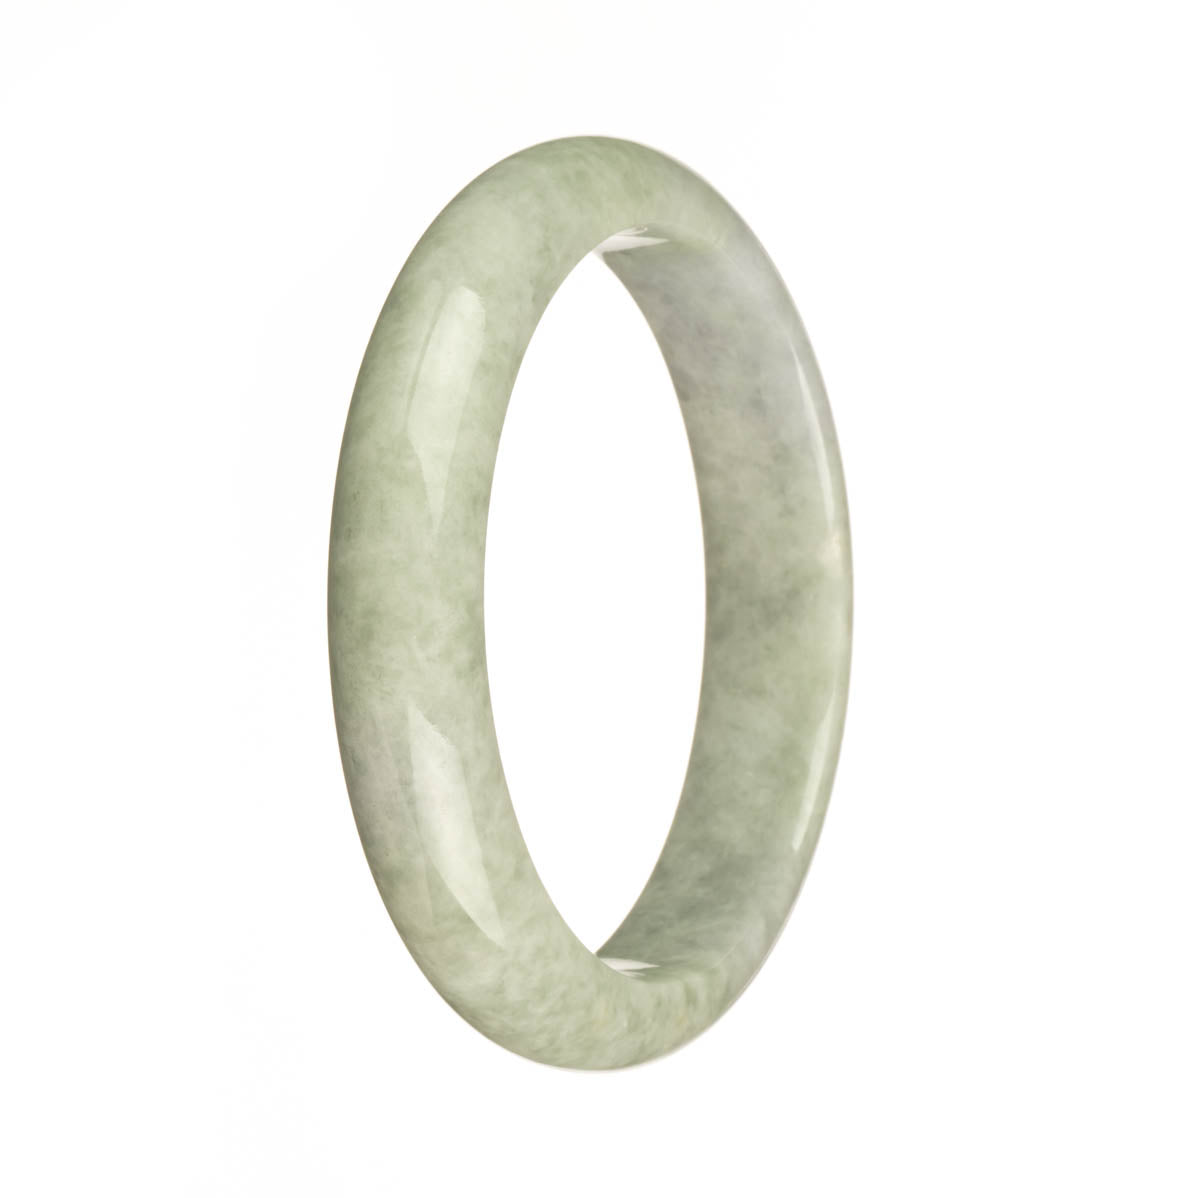 Genuine Type A Green with Lavender Patch Traditional Jade Bracelet - 59mm Half Moon